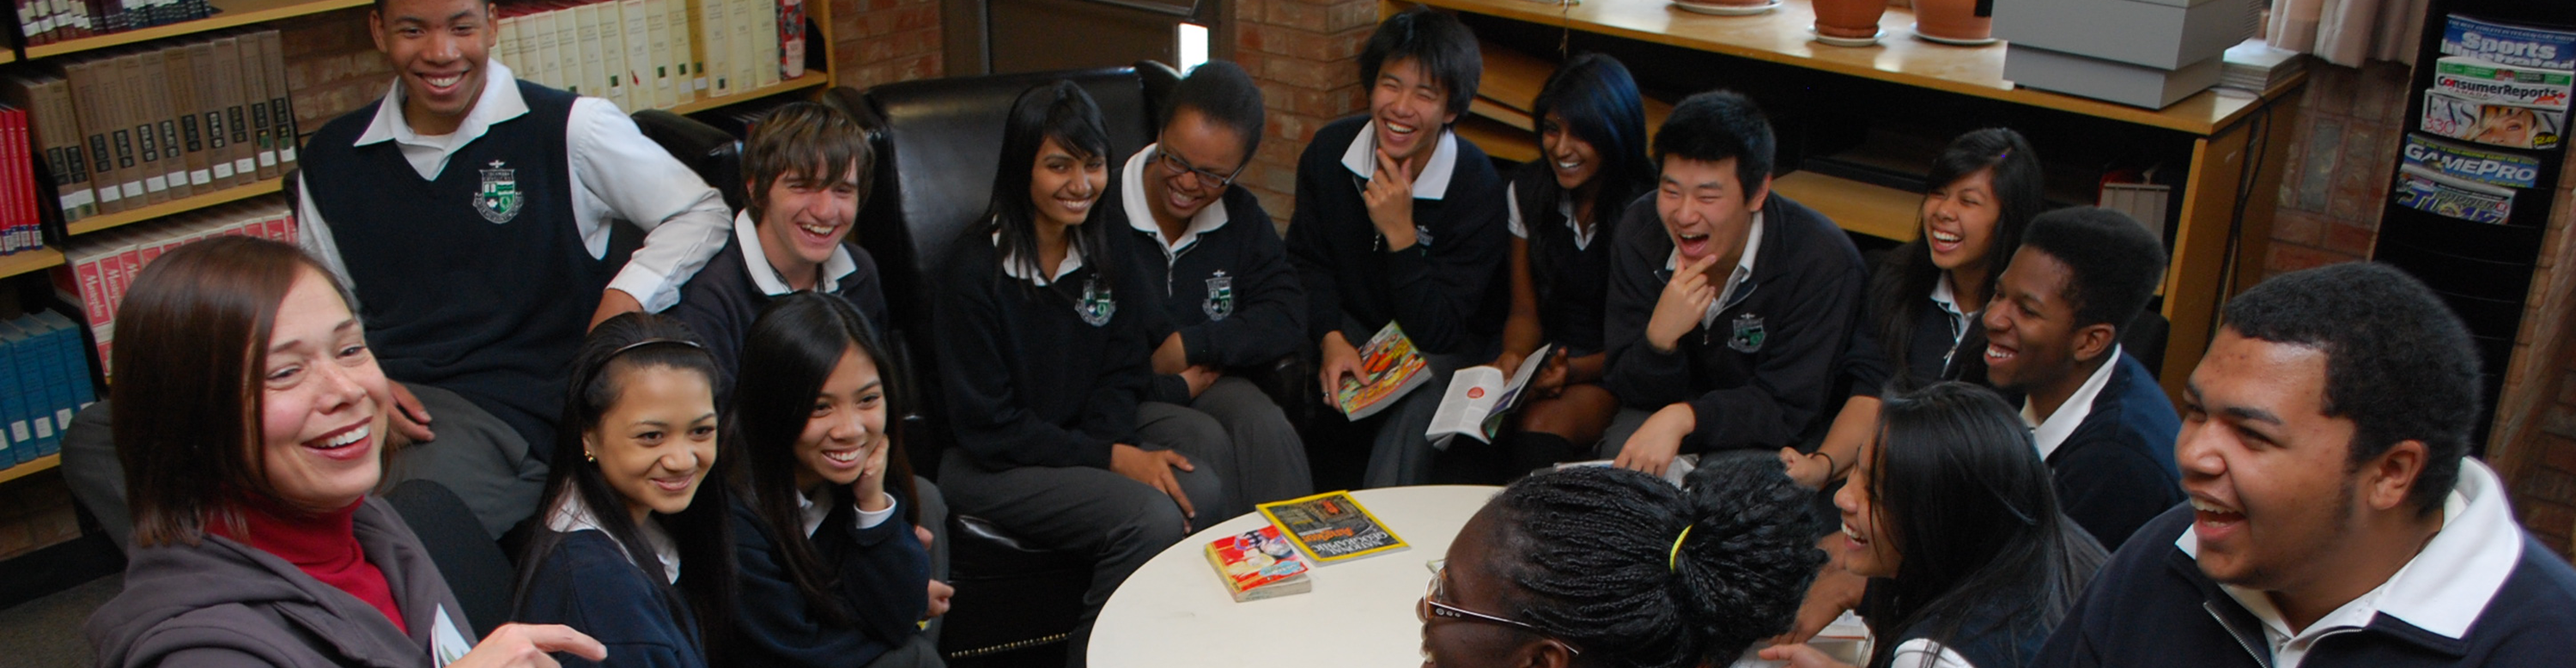 Group of Francis Libermann students in uniform sitting in a circle around the library, in a discussion with the librarian.